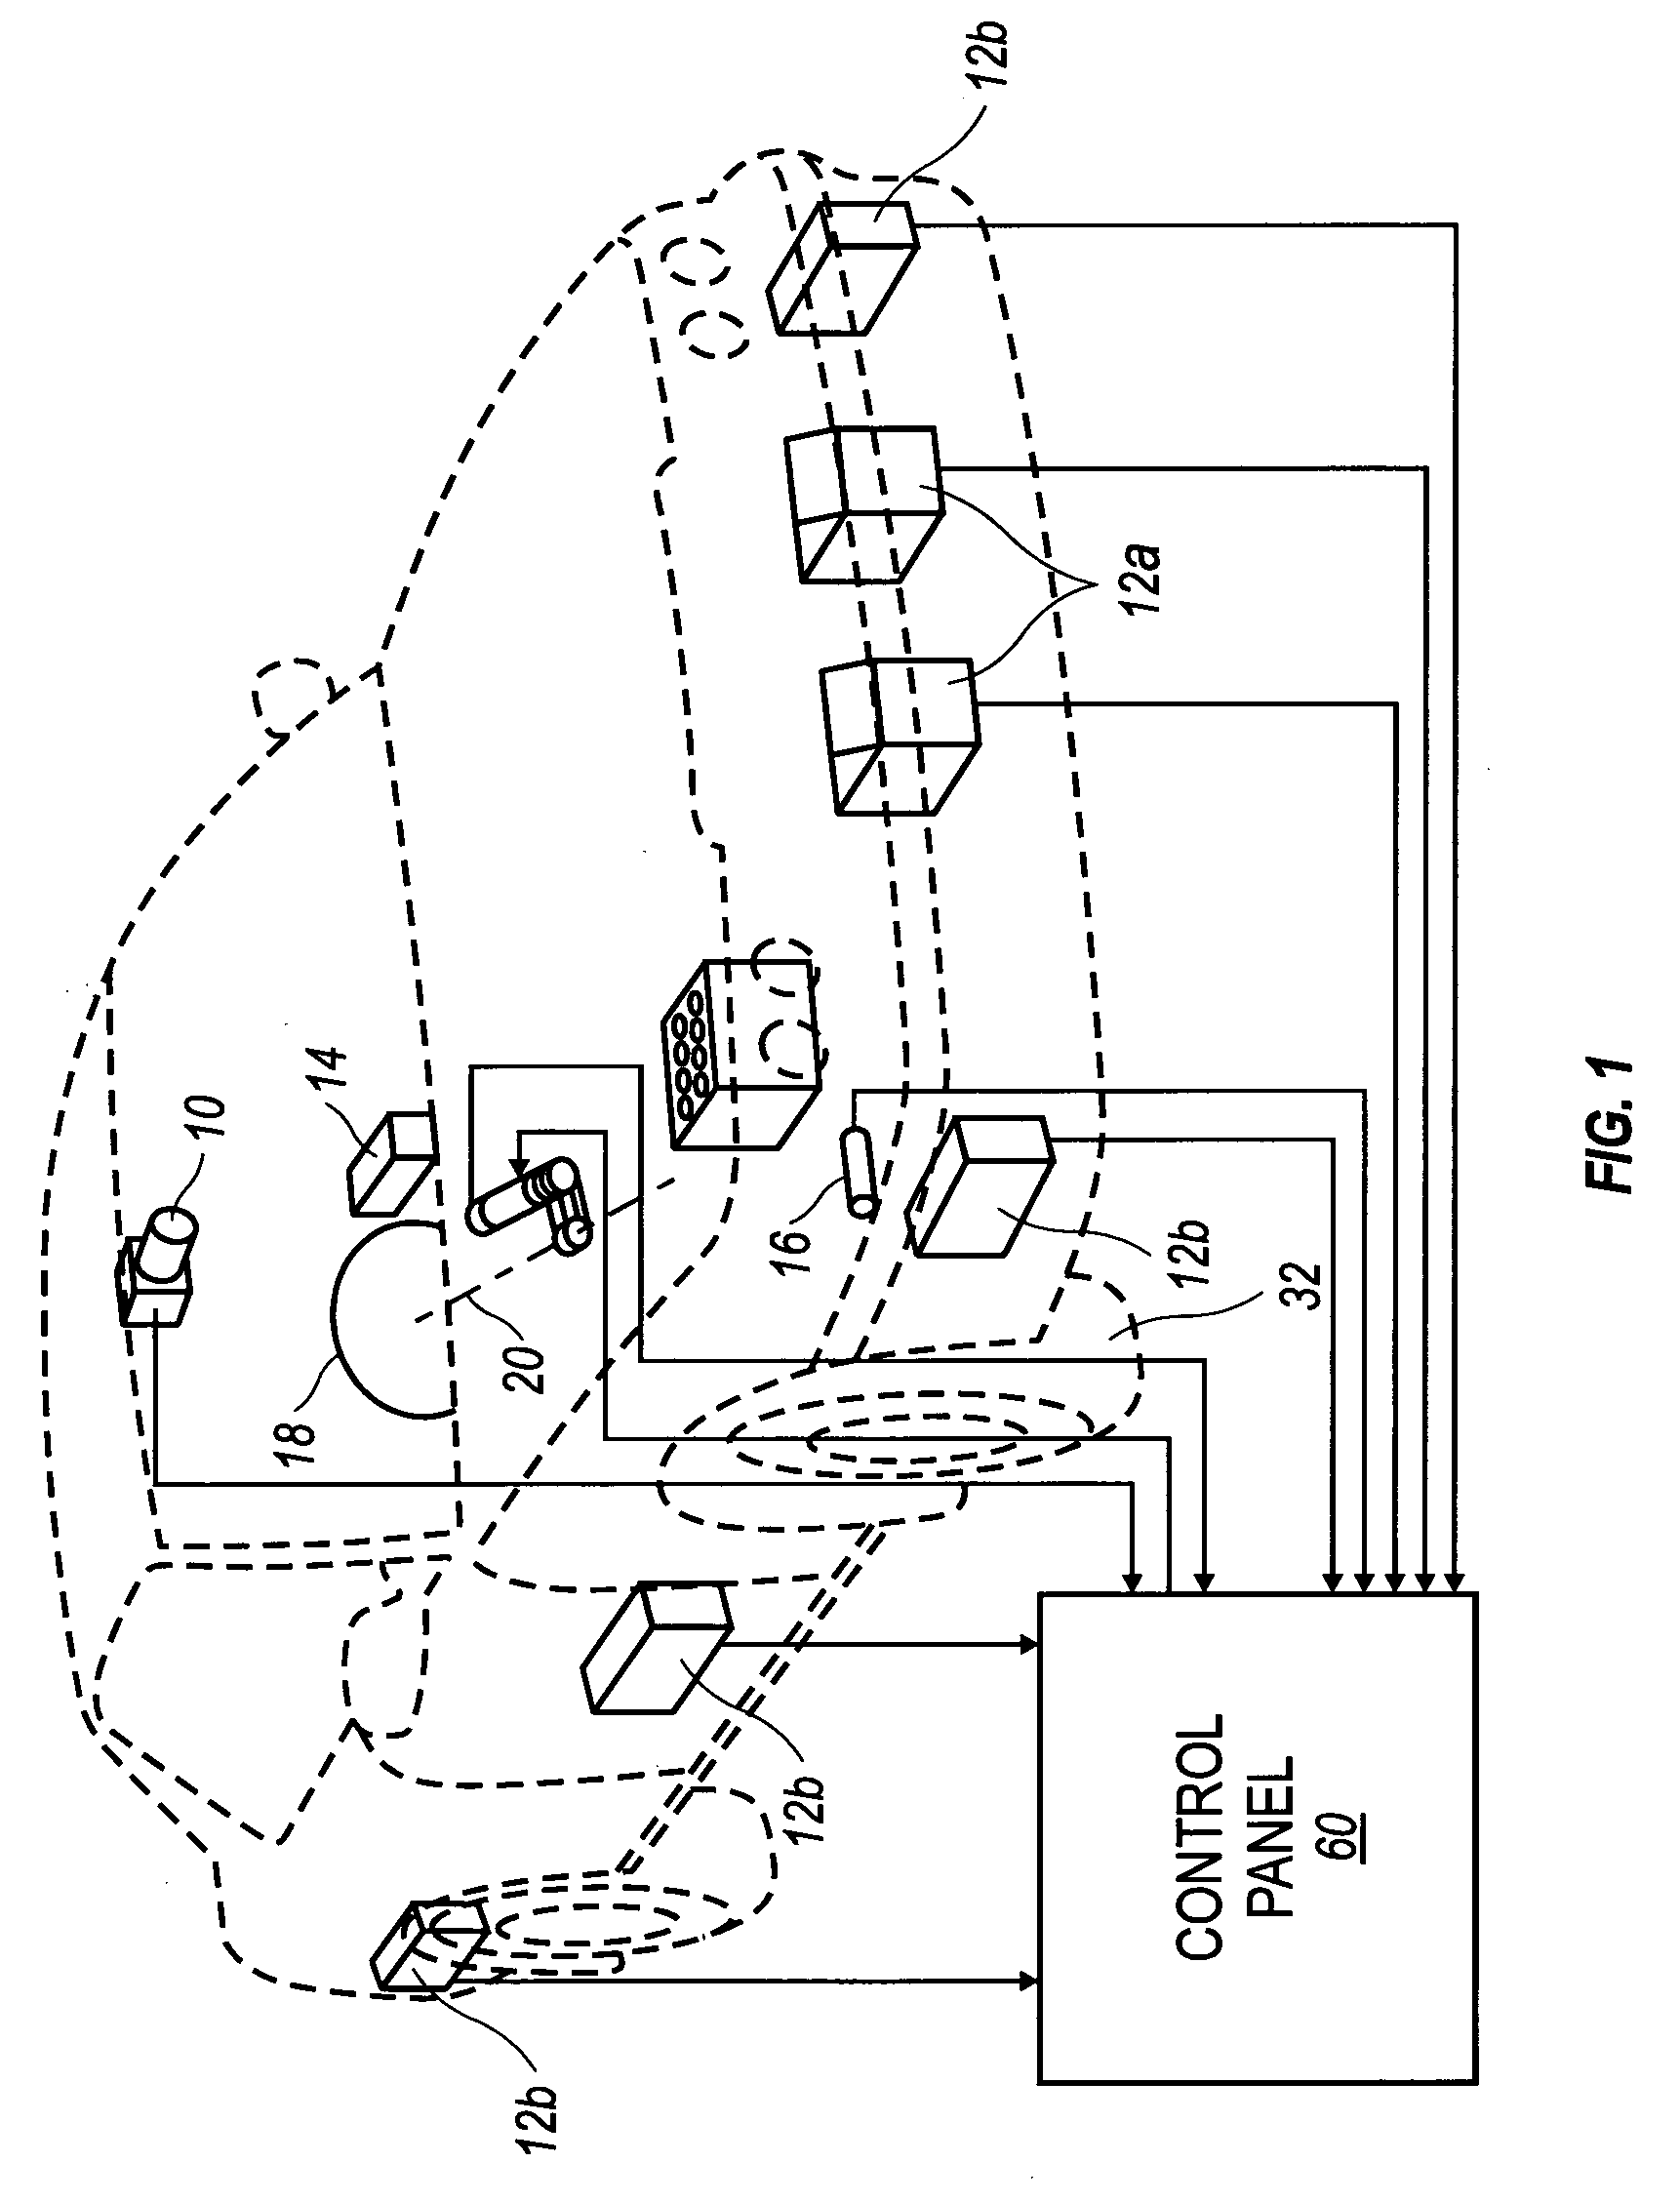 Method and apparatus for using an automated lane keeping system to maintain lateral vehicle spacing